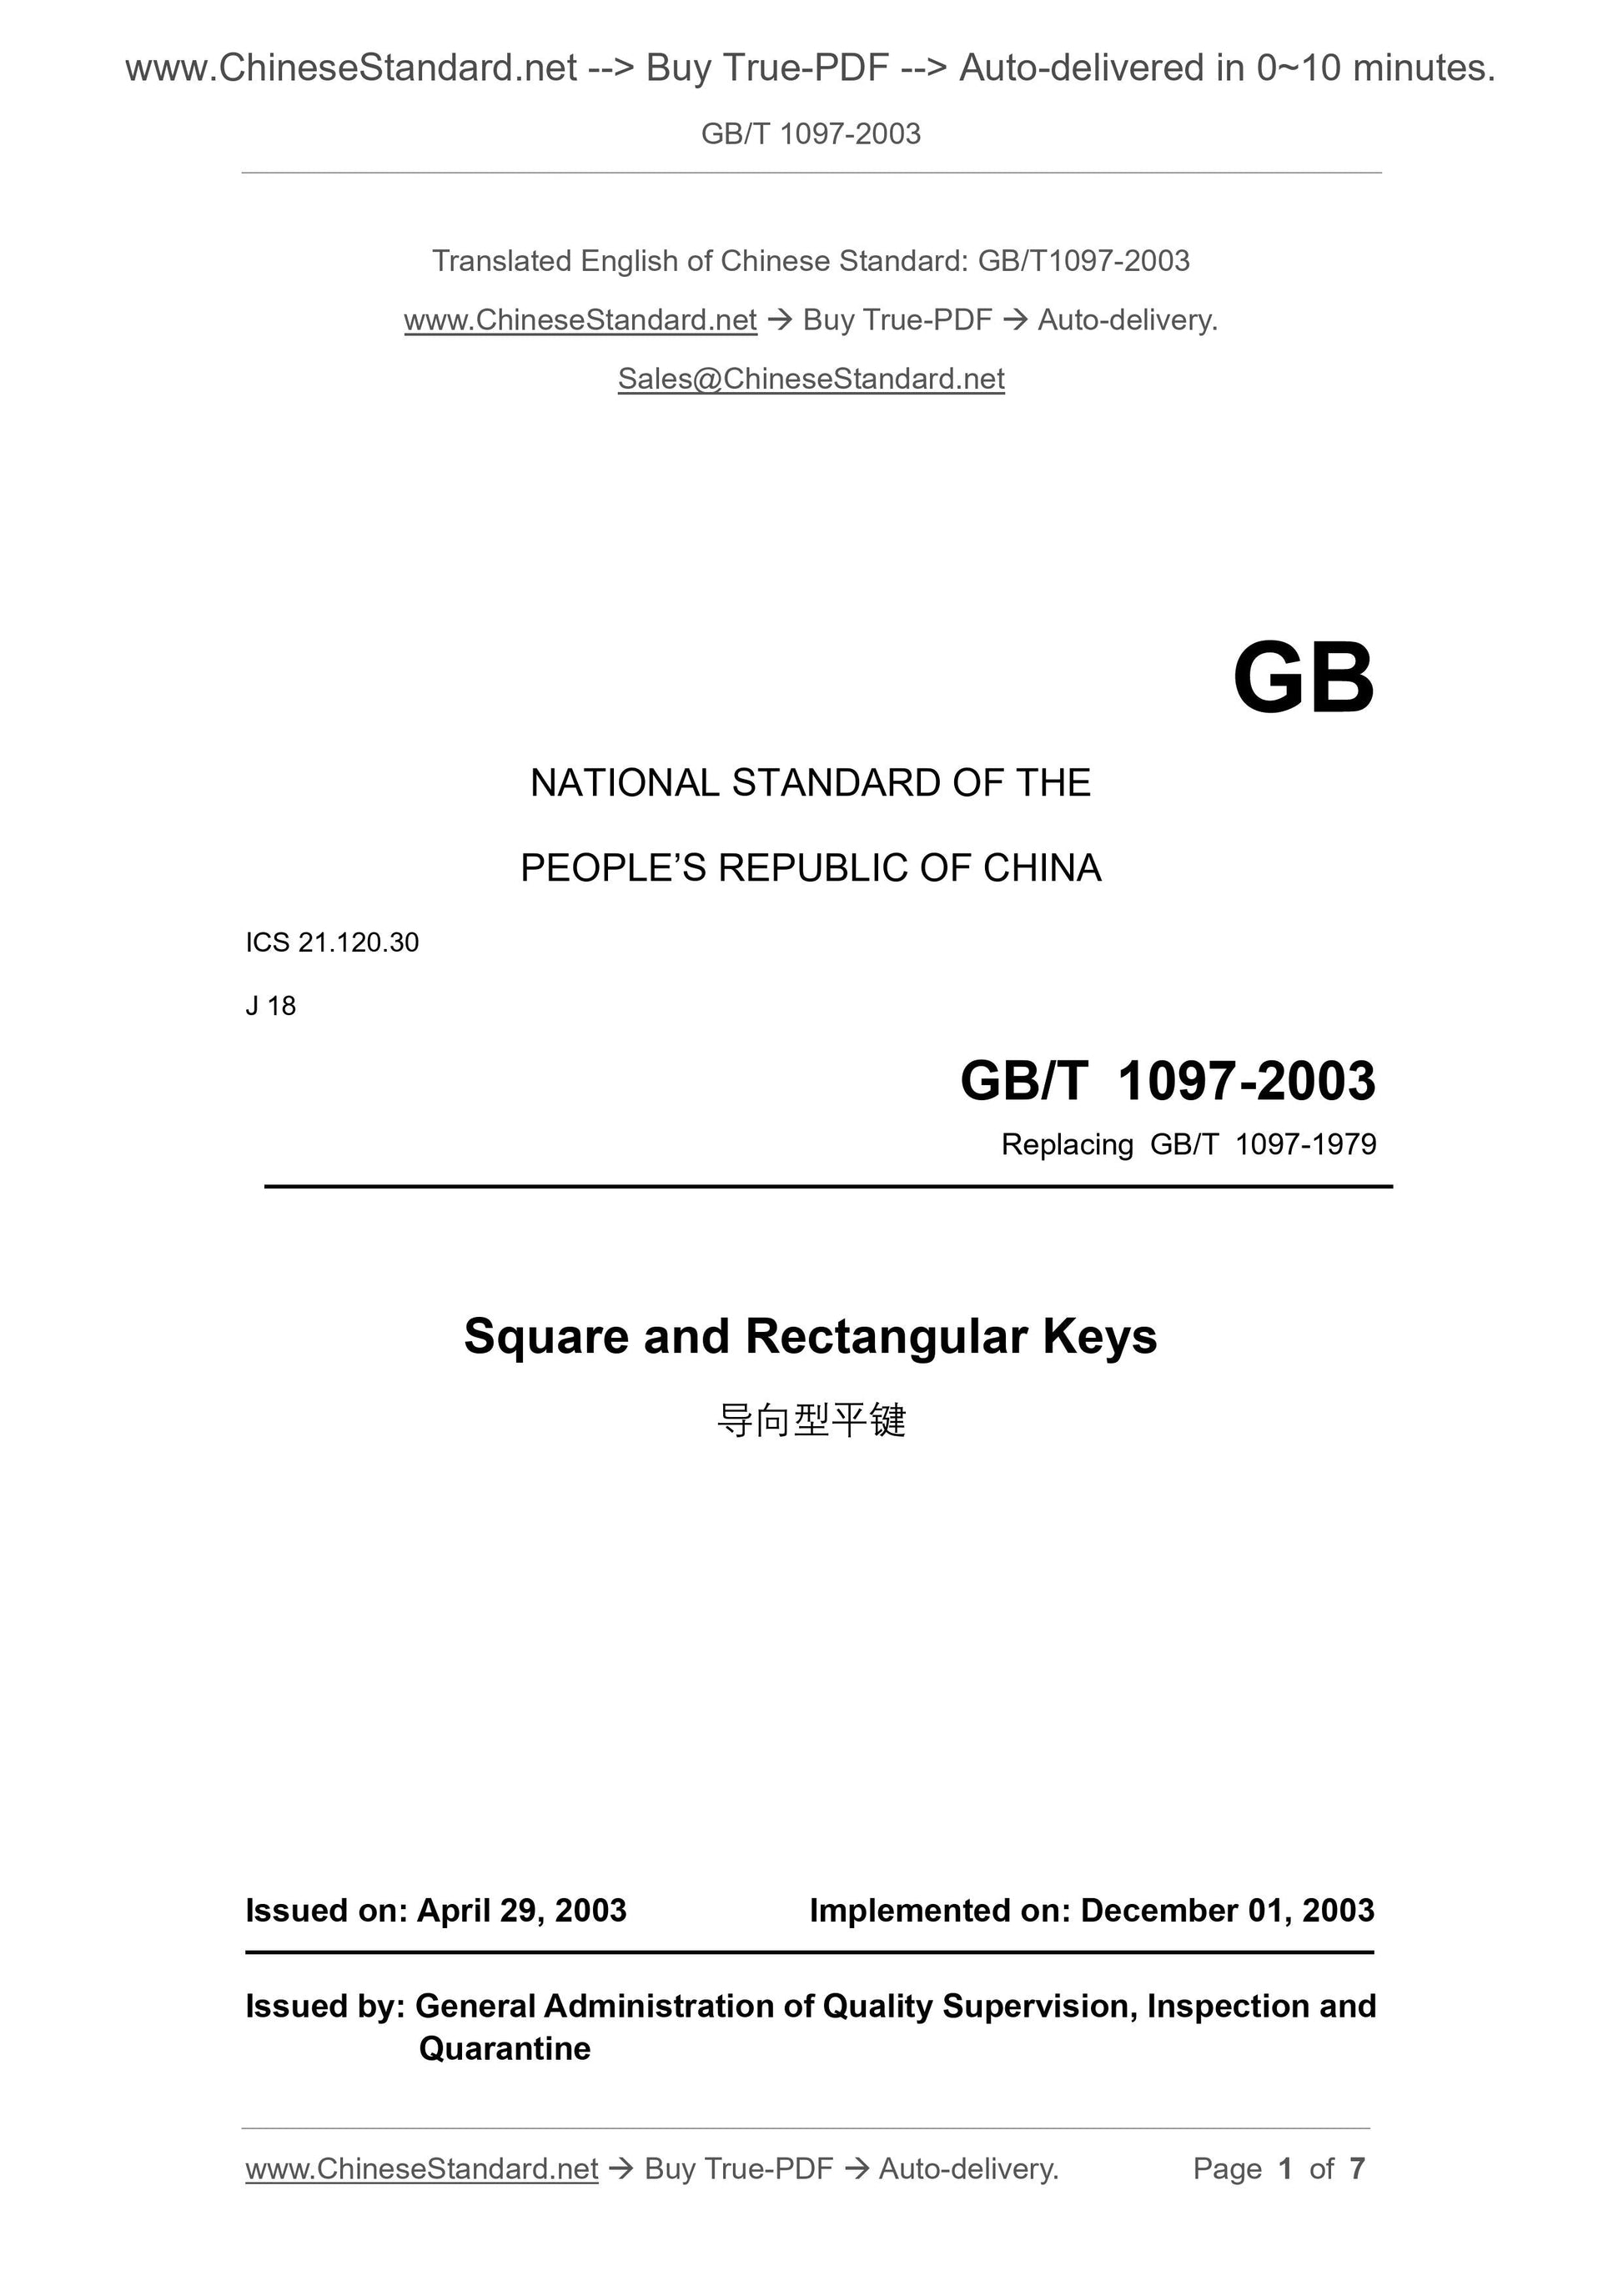 GB/T 1097-2003 Page 1